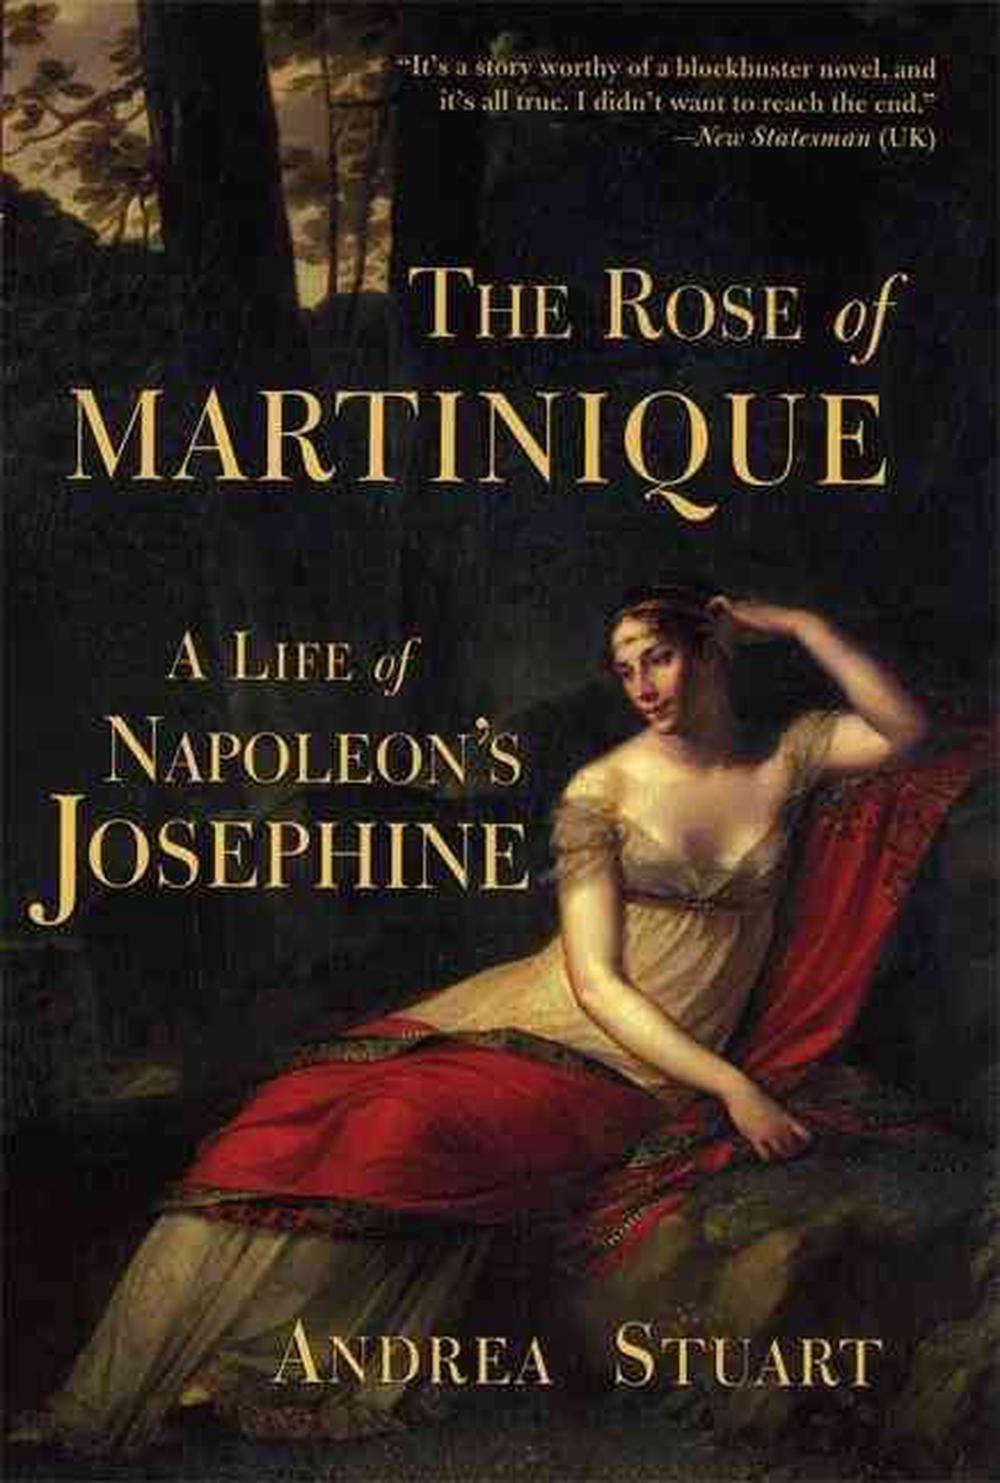 The Rose of Martinique by Andrea Stuart